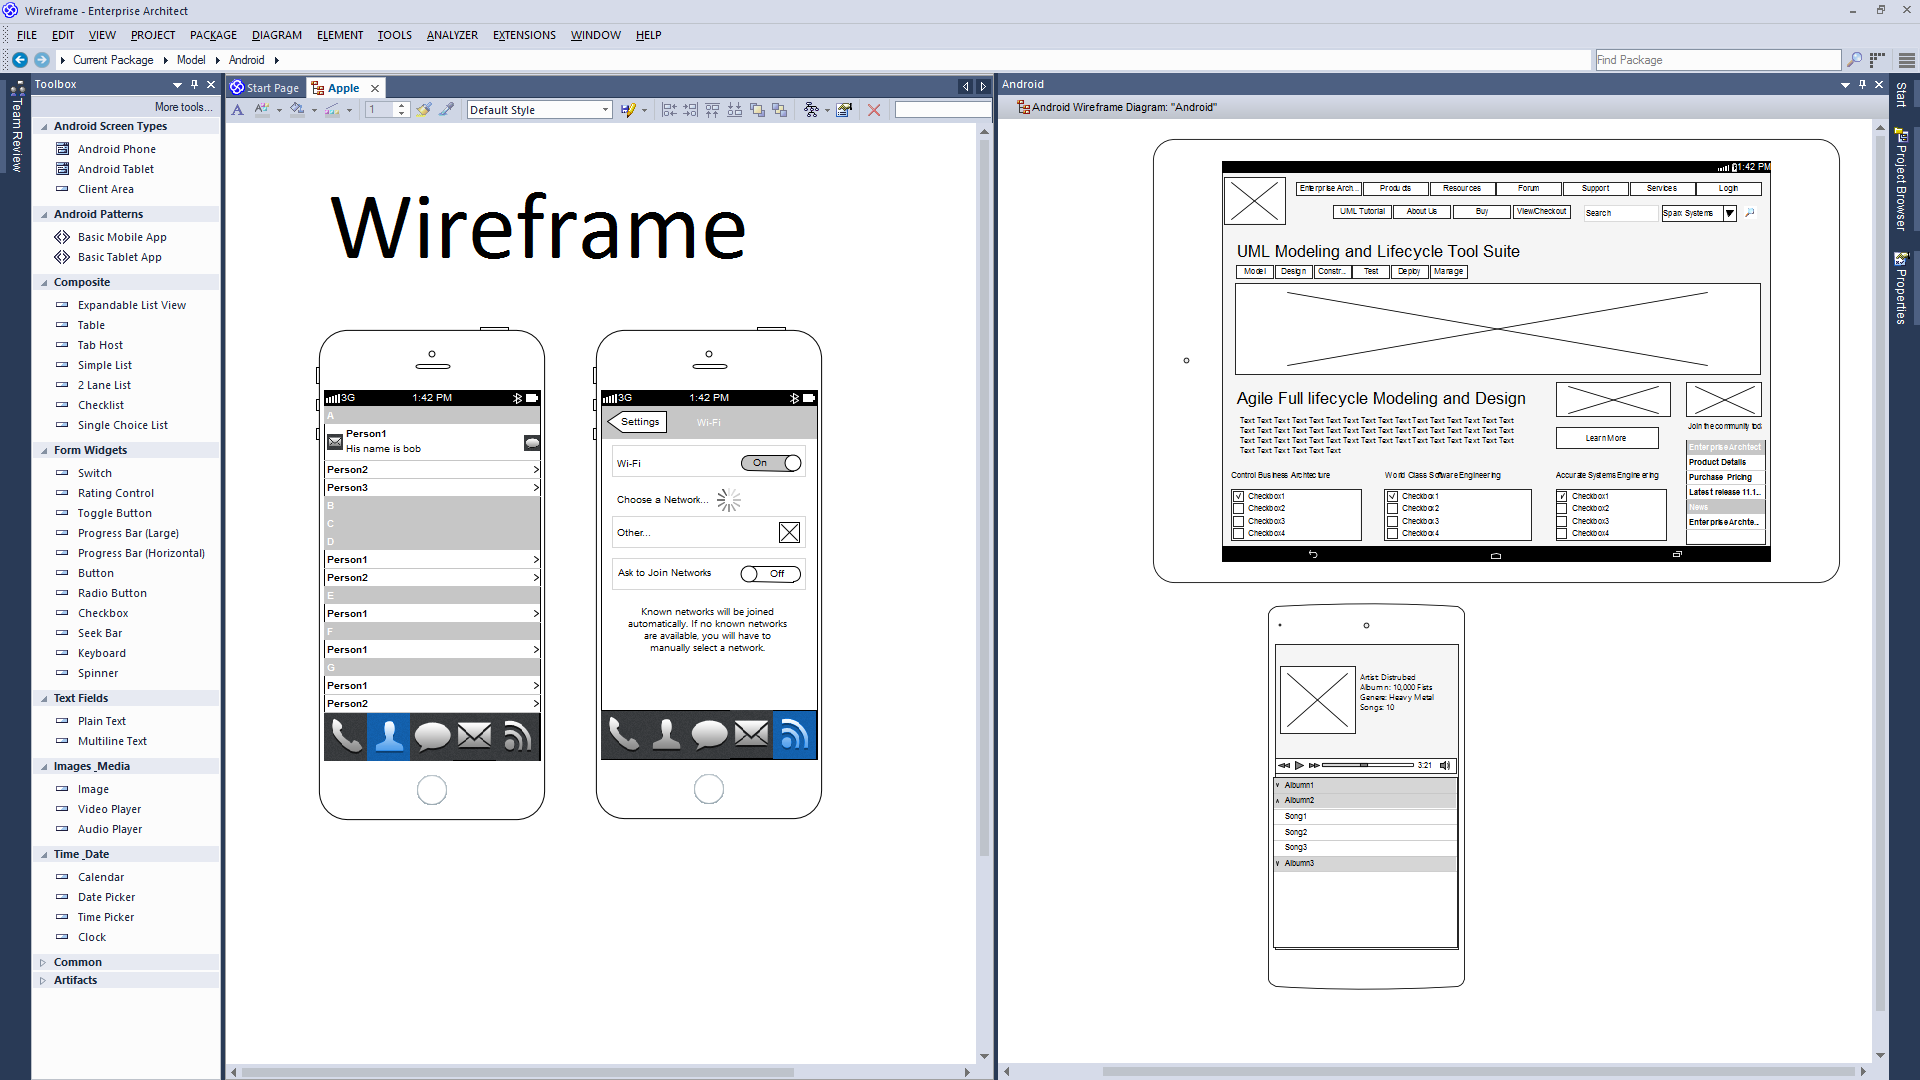 Support for Wireframes